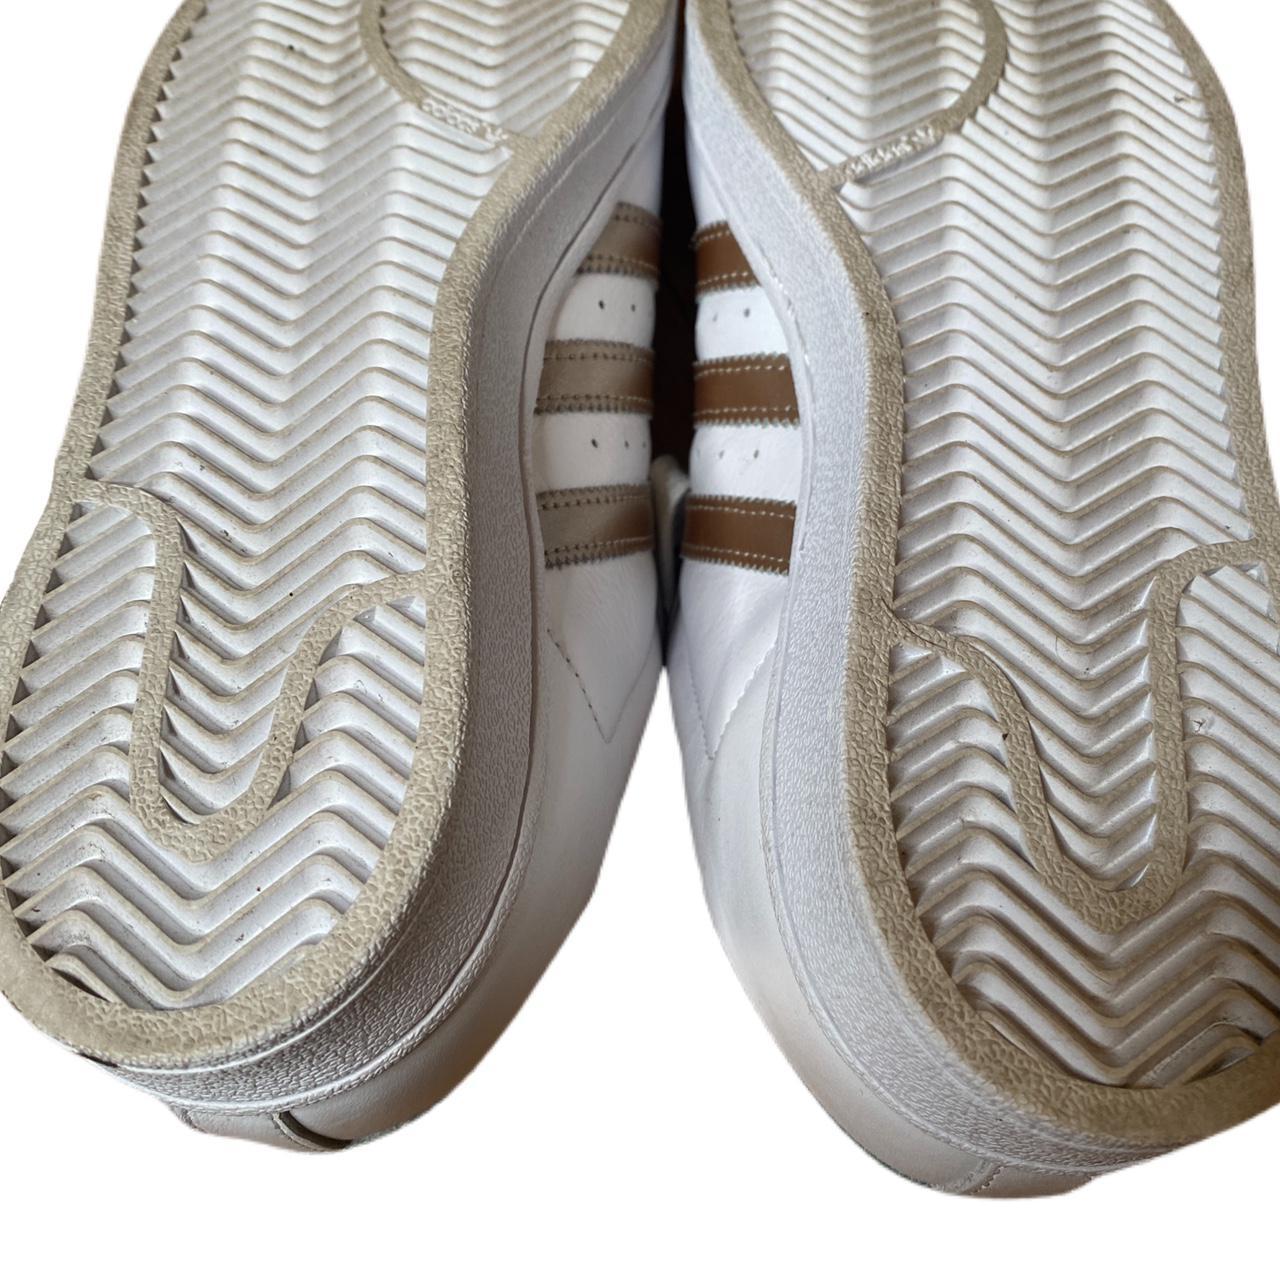 Product Image 4 - Adidas superstar white and gold